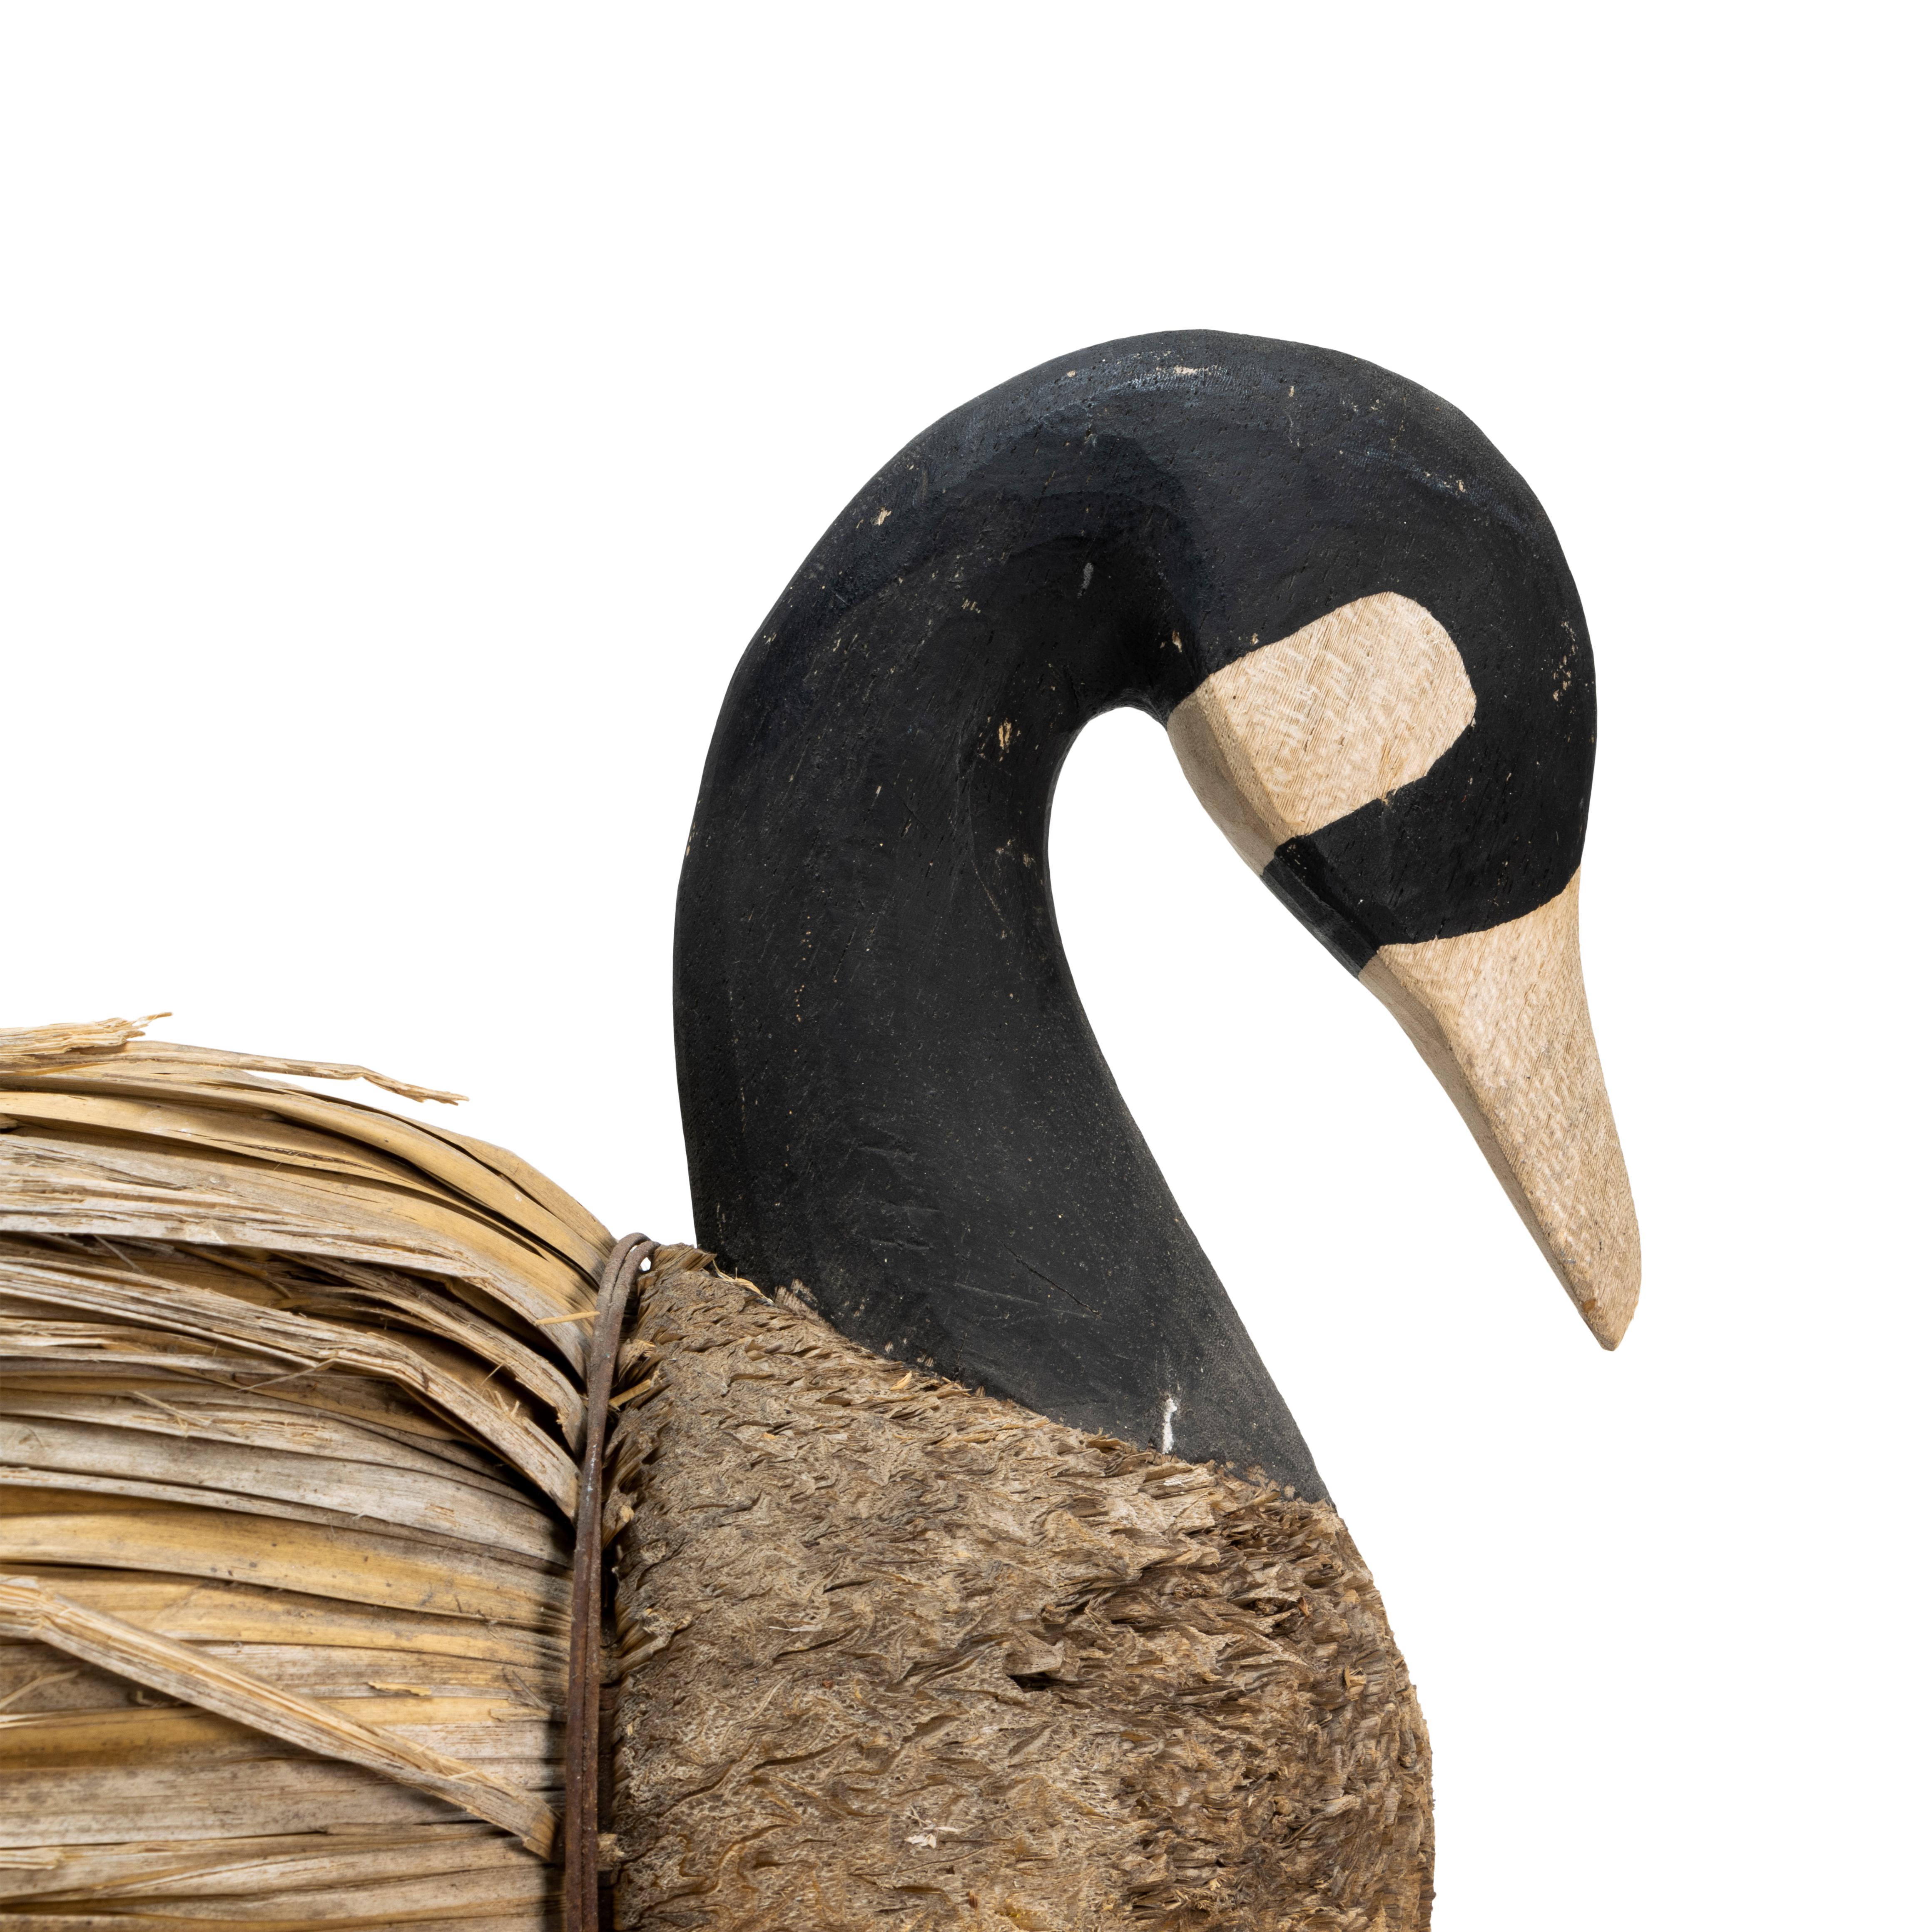 Early 20th Century American straw and wood Canada goose decoy. Black paint.  25